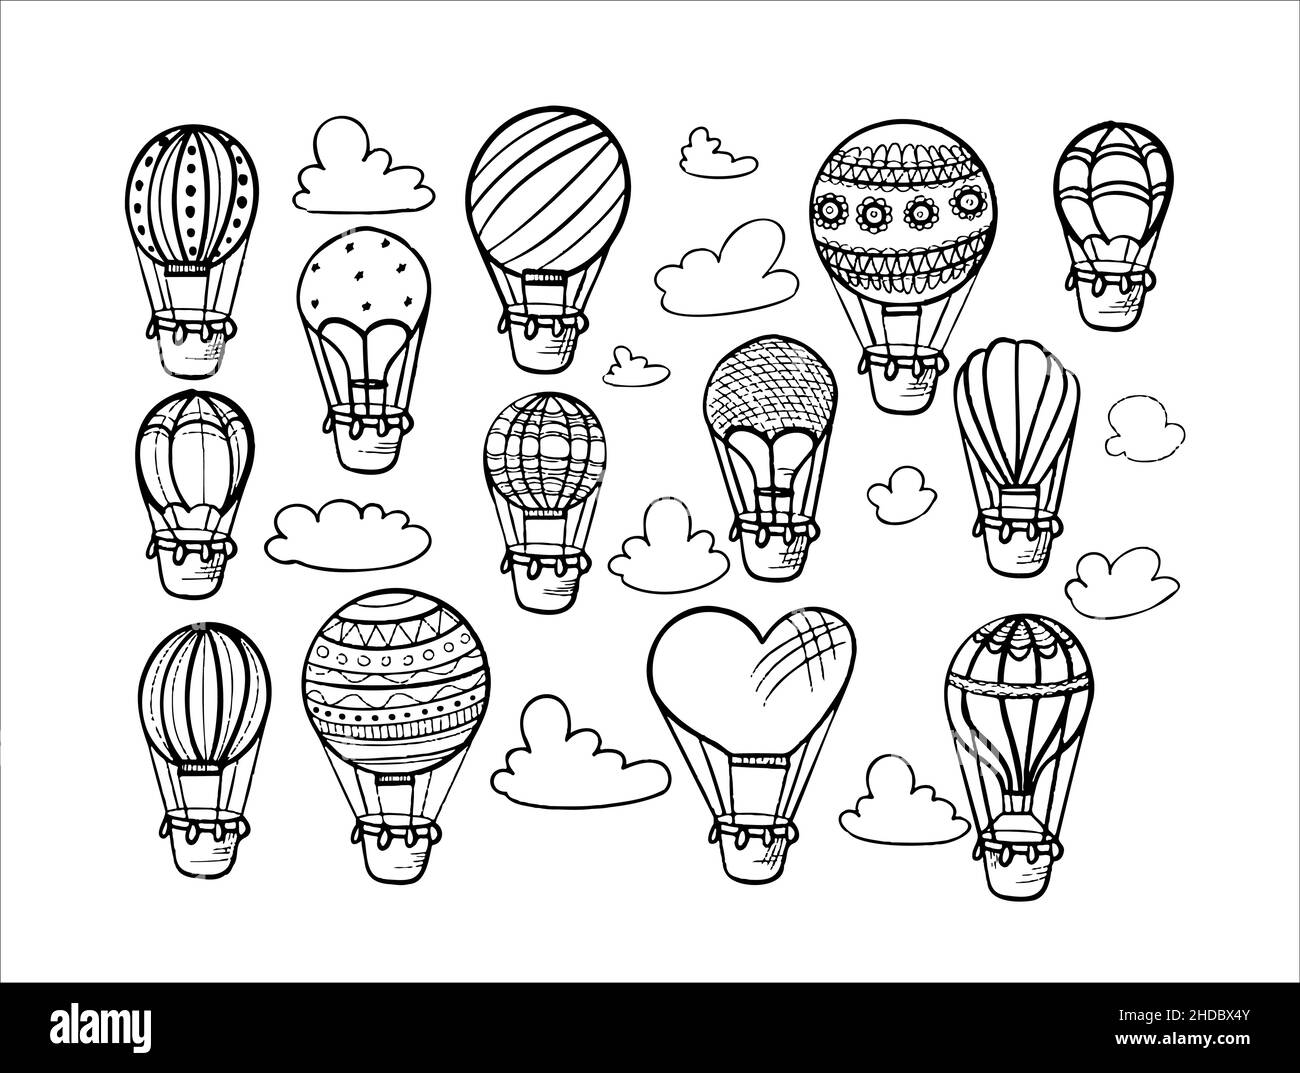 Doodle set of hot air balloons with clouds. hand draw illustration flying vehicles. Romantic balloons. Sky with tourist balloons for flight. Cartoon Stock Vector